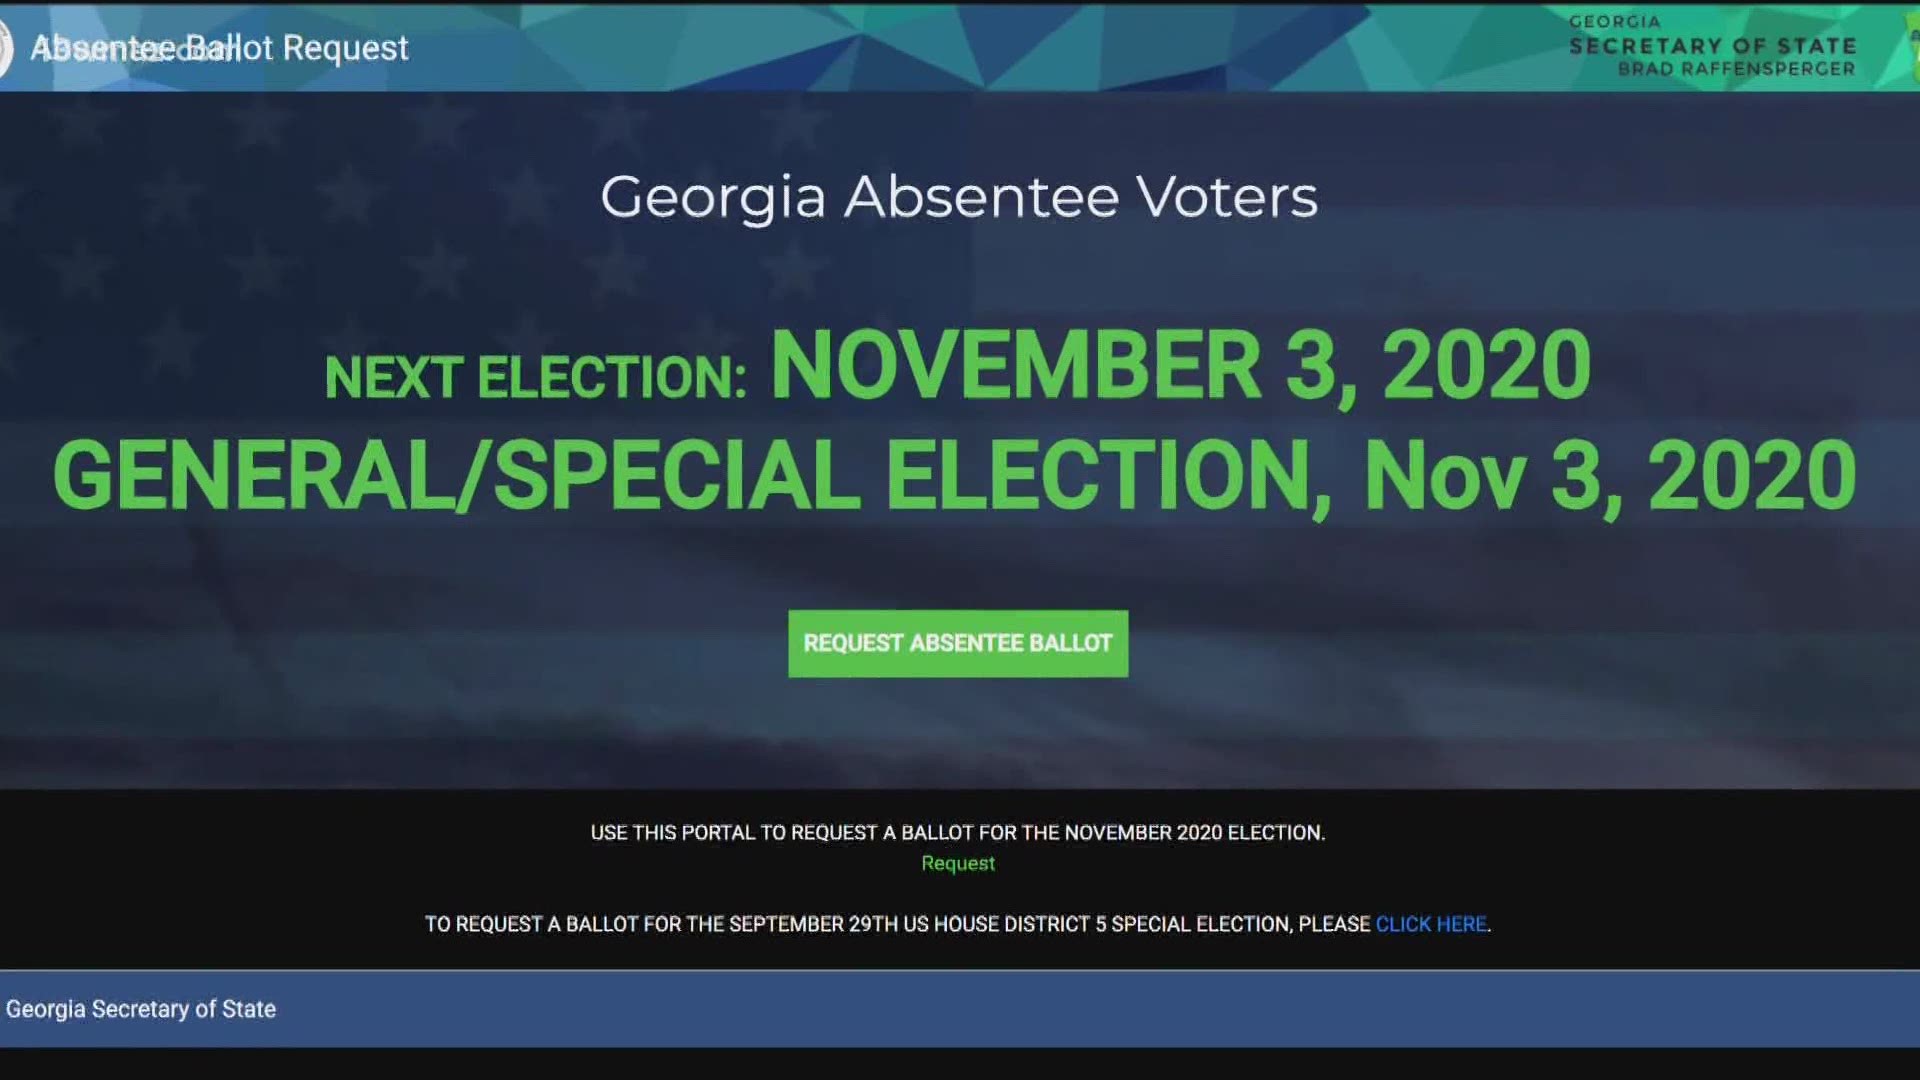 Absentee ballots will be sent to Georgia voters beginning in September. You can verify that your ballot was accepted by visiting Georgia's My Voter Page